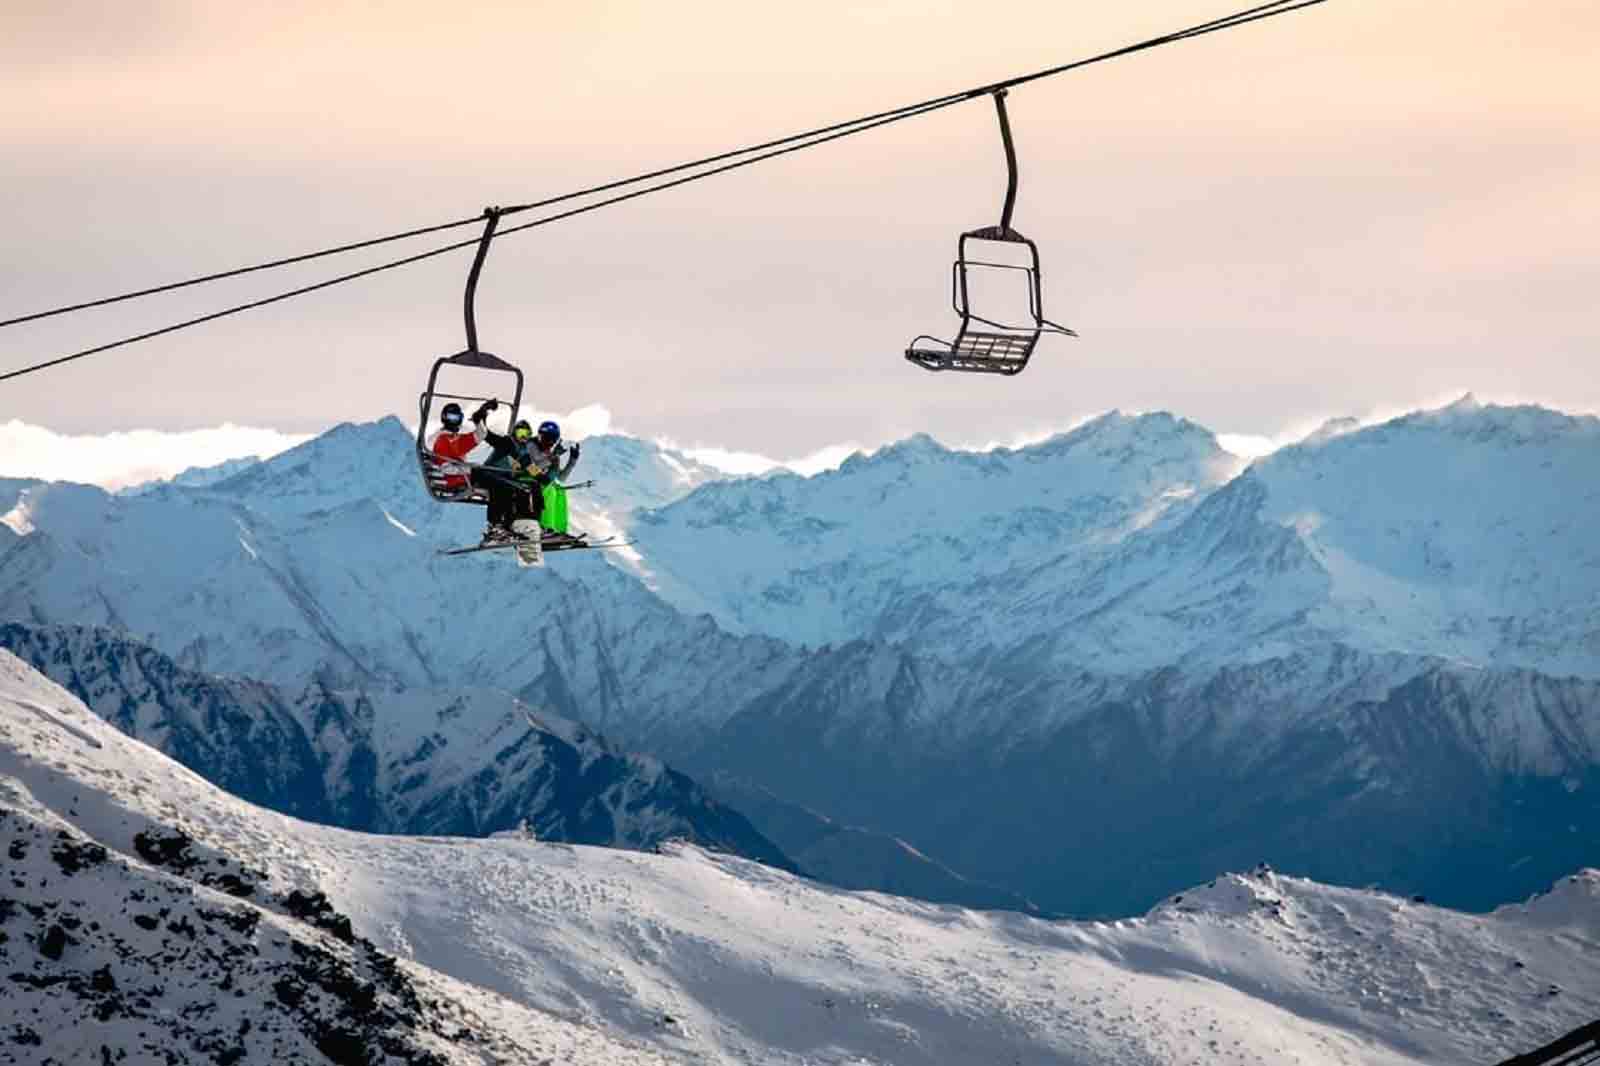 Have the adventure of a lifetime at The Remarkables